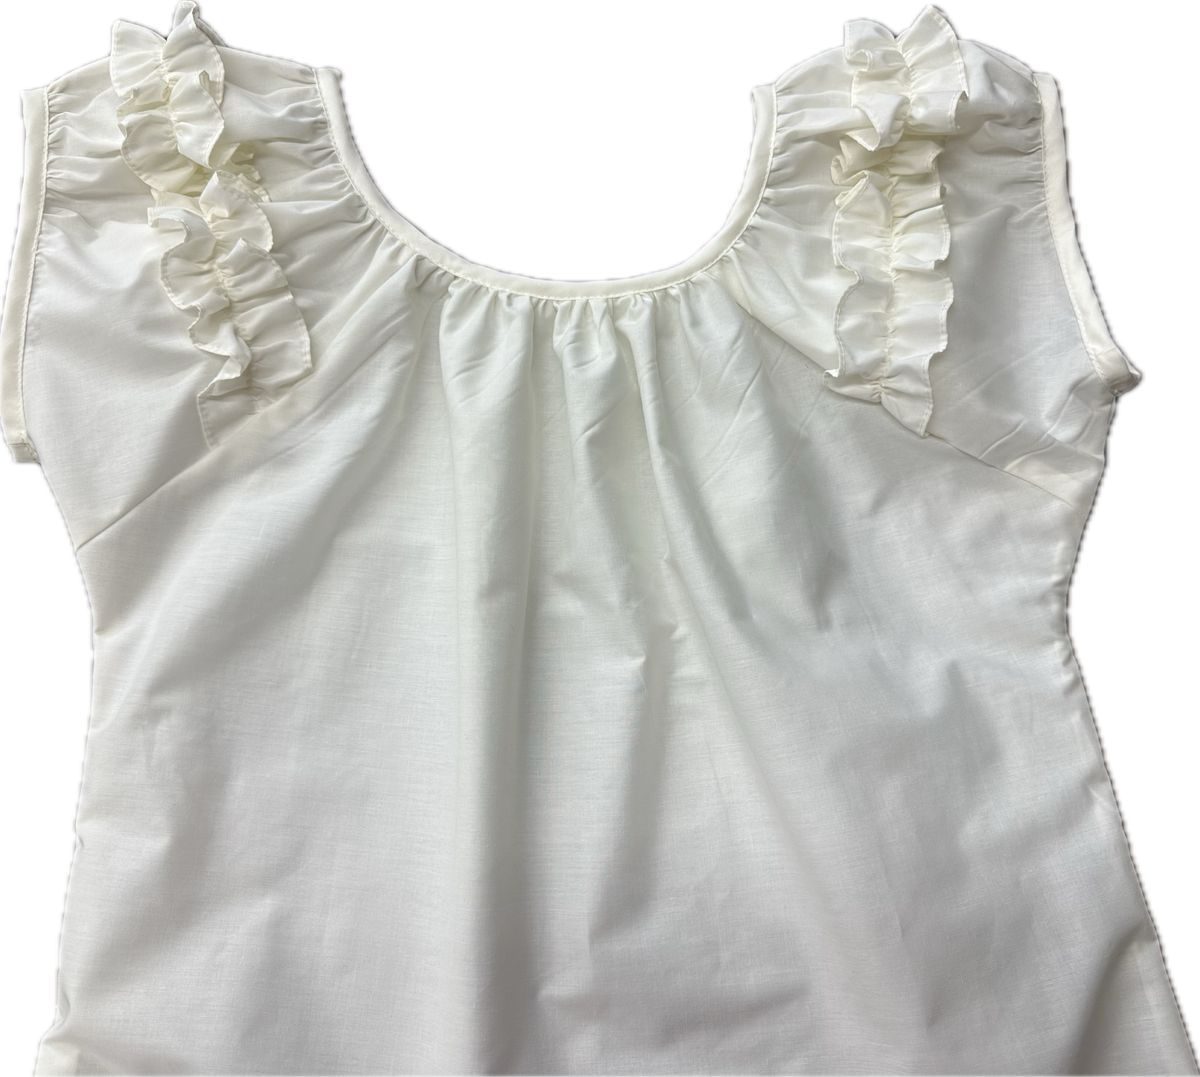 A Basic Ruffle Blouse from Square Up Fashions with ruffled sleeves.